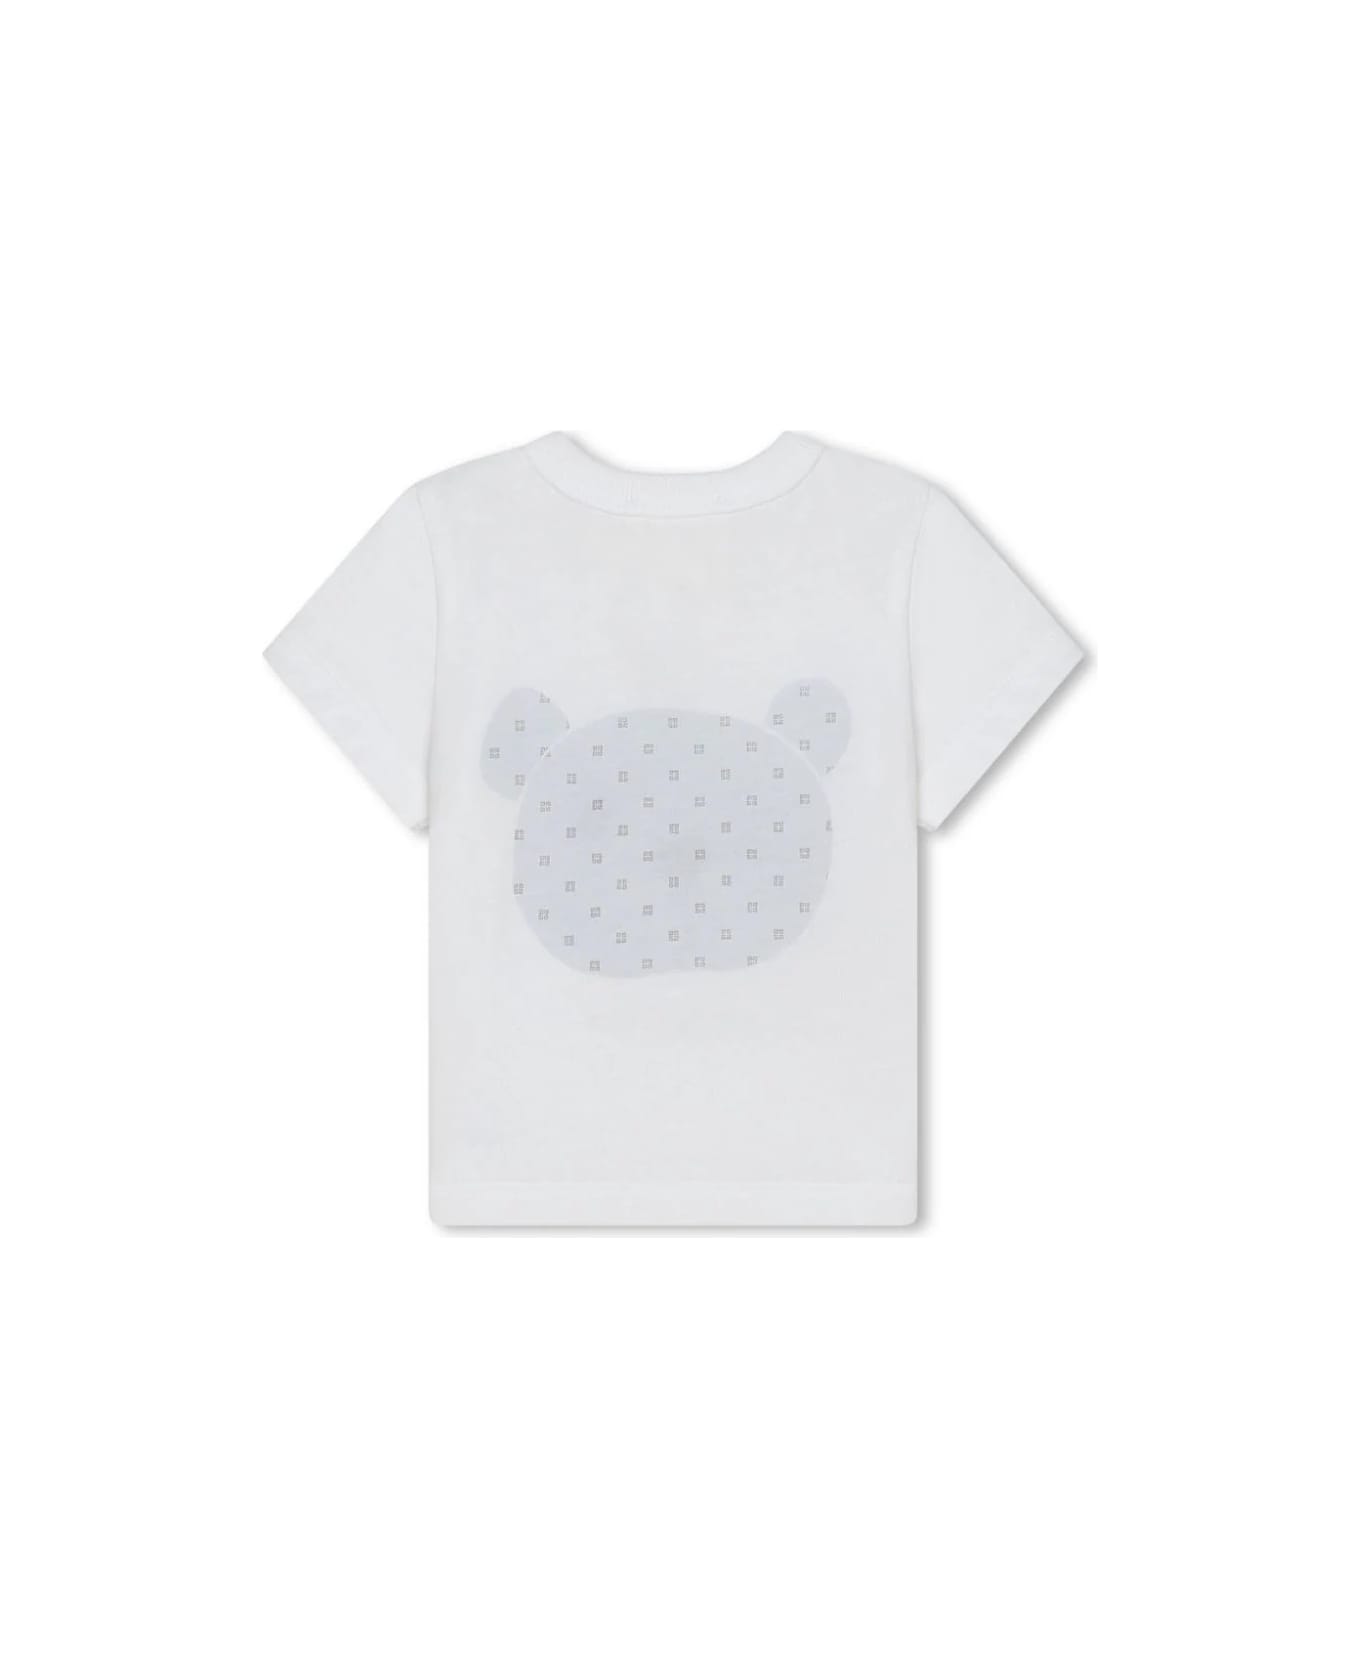 Givenchy Set With Printed Cotton T-shirt, Shorts And Bandana - White ボディスーツ＆セットアップ